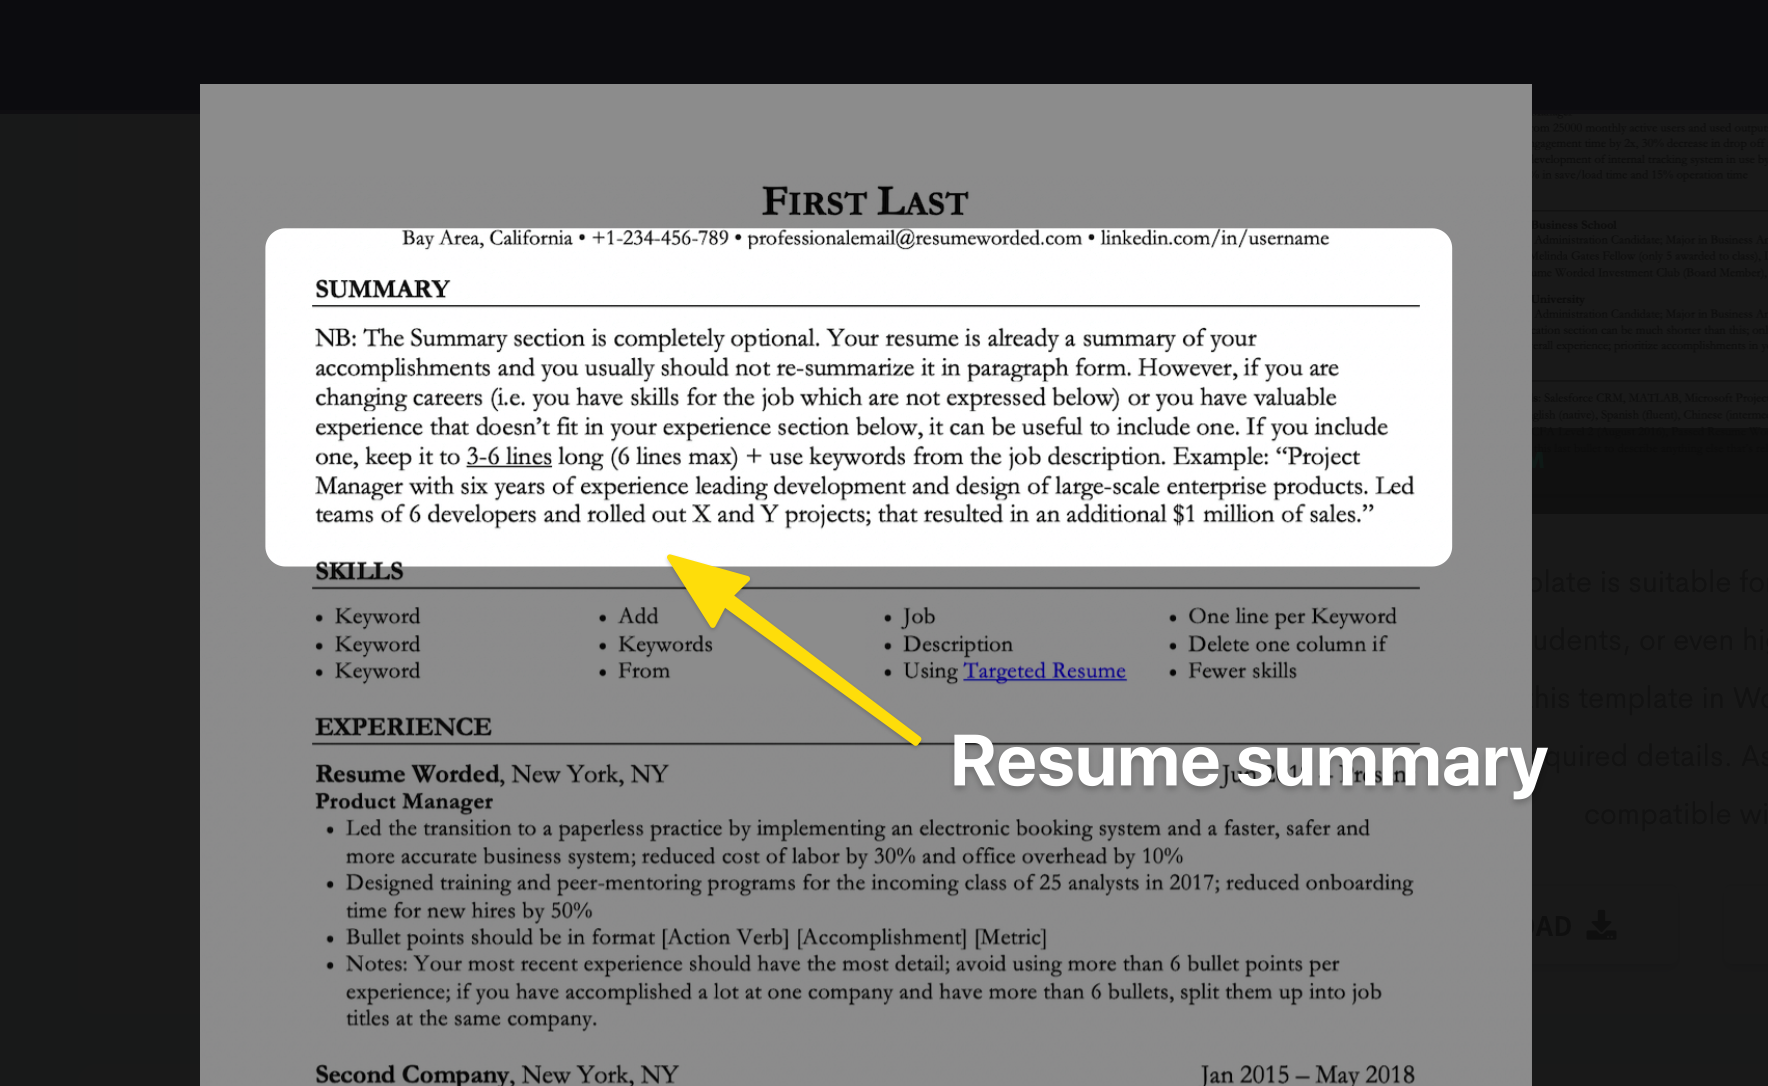 how to write a resume summary if you're changing careers